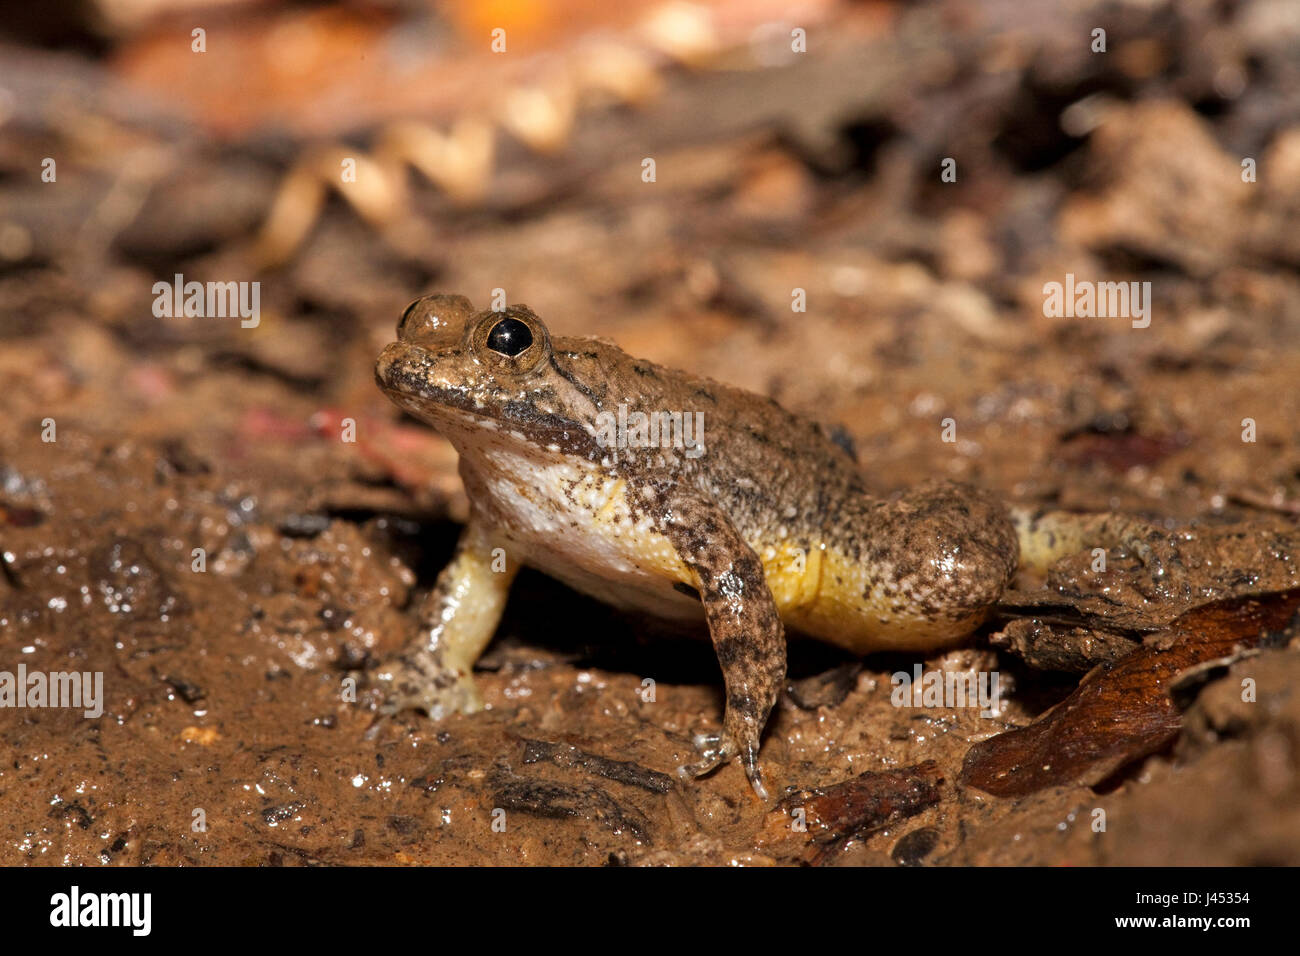 photo of a yellow-bellied puddle frog Stock Photo